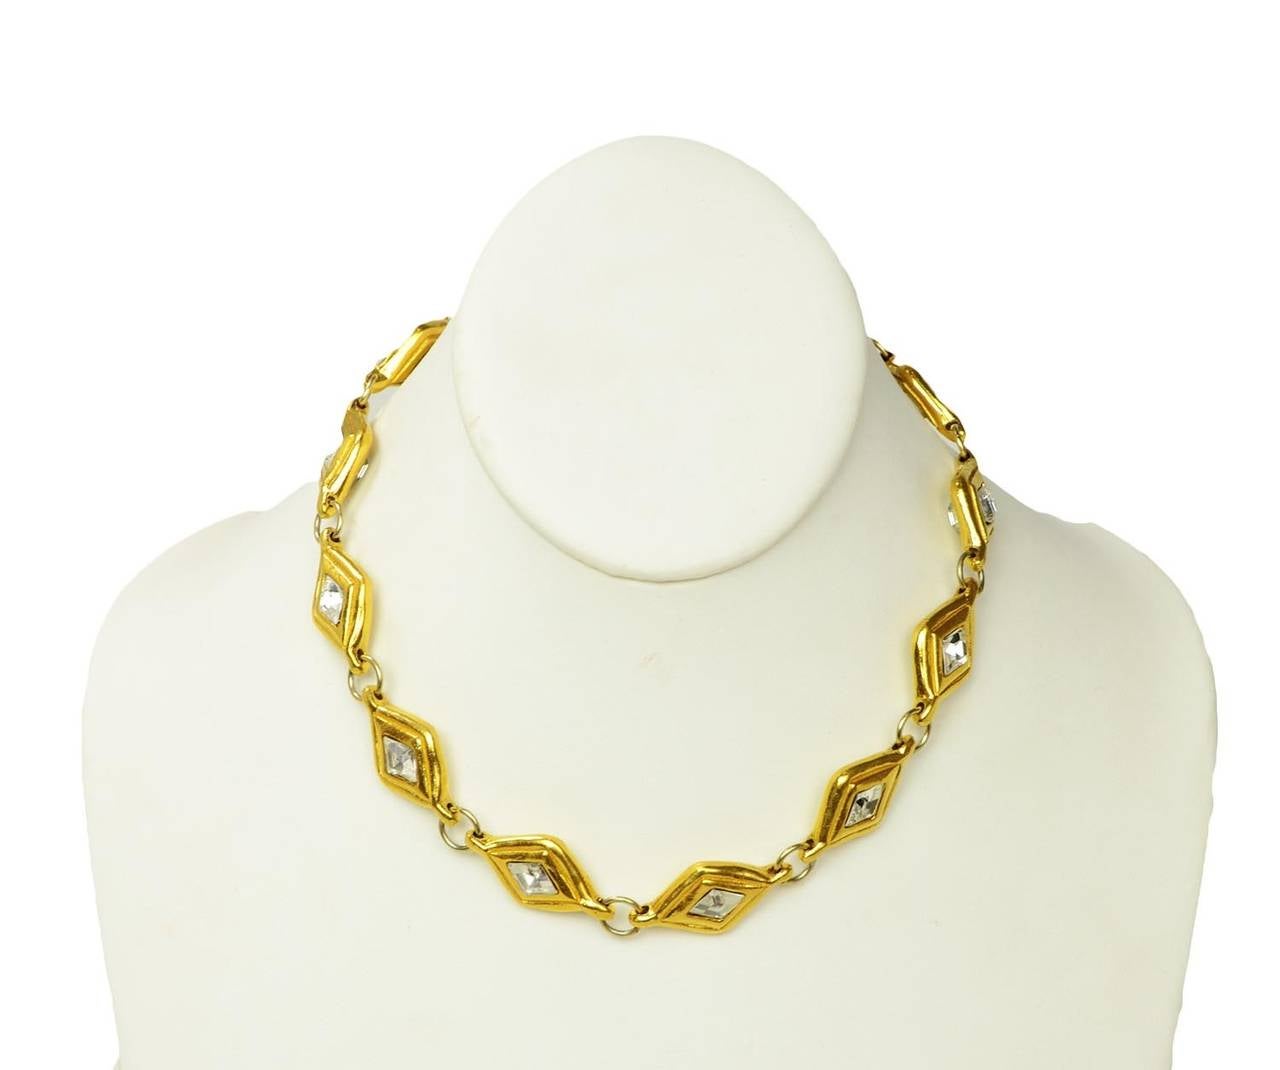 Chanel Vintage '70s Gold Choker Necklace w/Diamond Shaped Crystal Links

    Made in: France
    Year of Production: 1970's
    Stamp: CHANEL CC MADE IN FRANCE
    Closure: Jump ring closure
    Color: Goldtone
    Materials: Metal and crystal
   